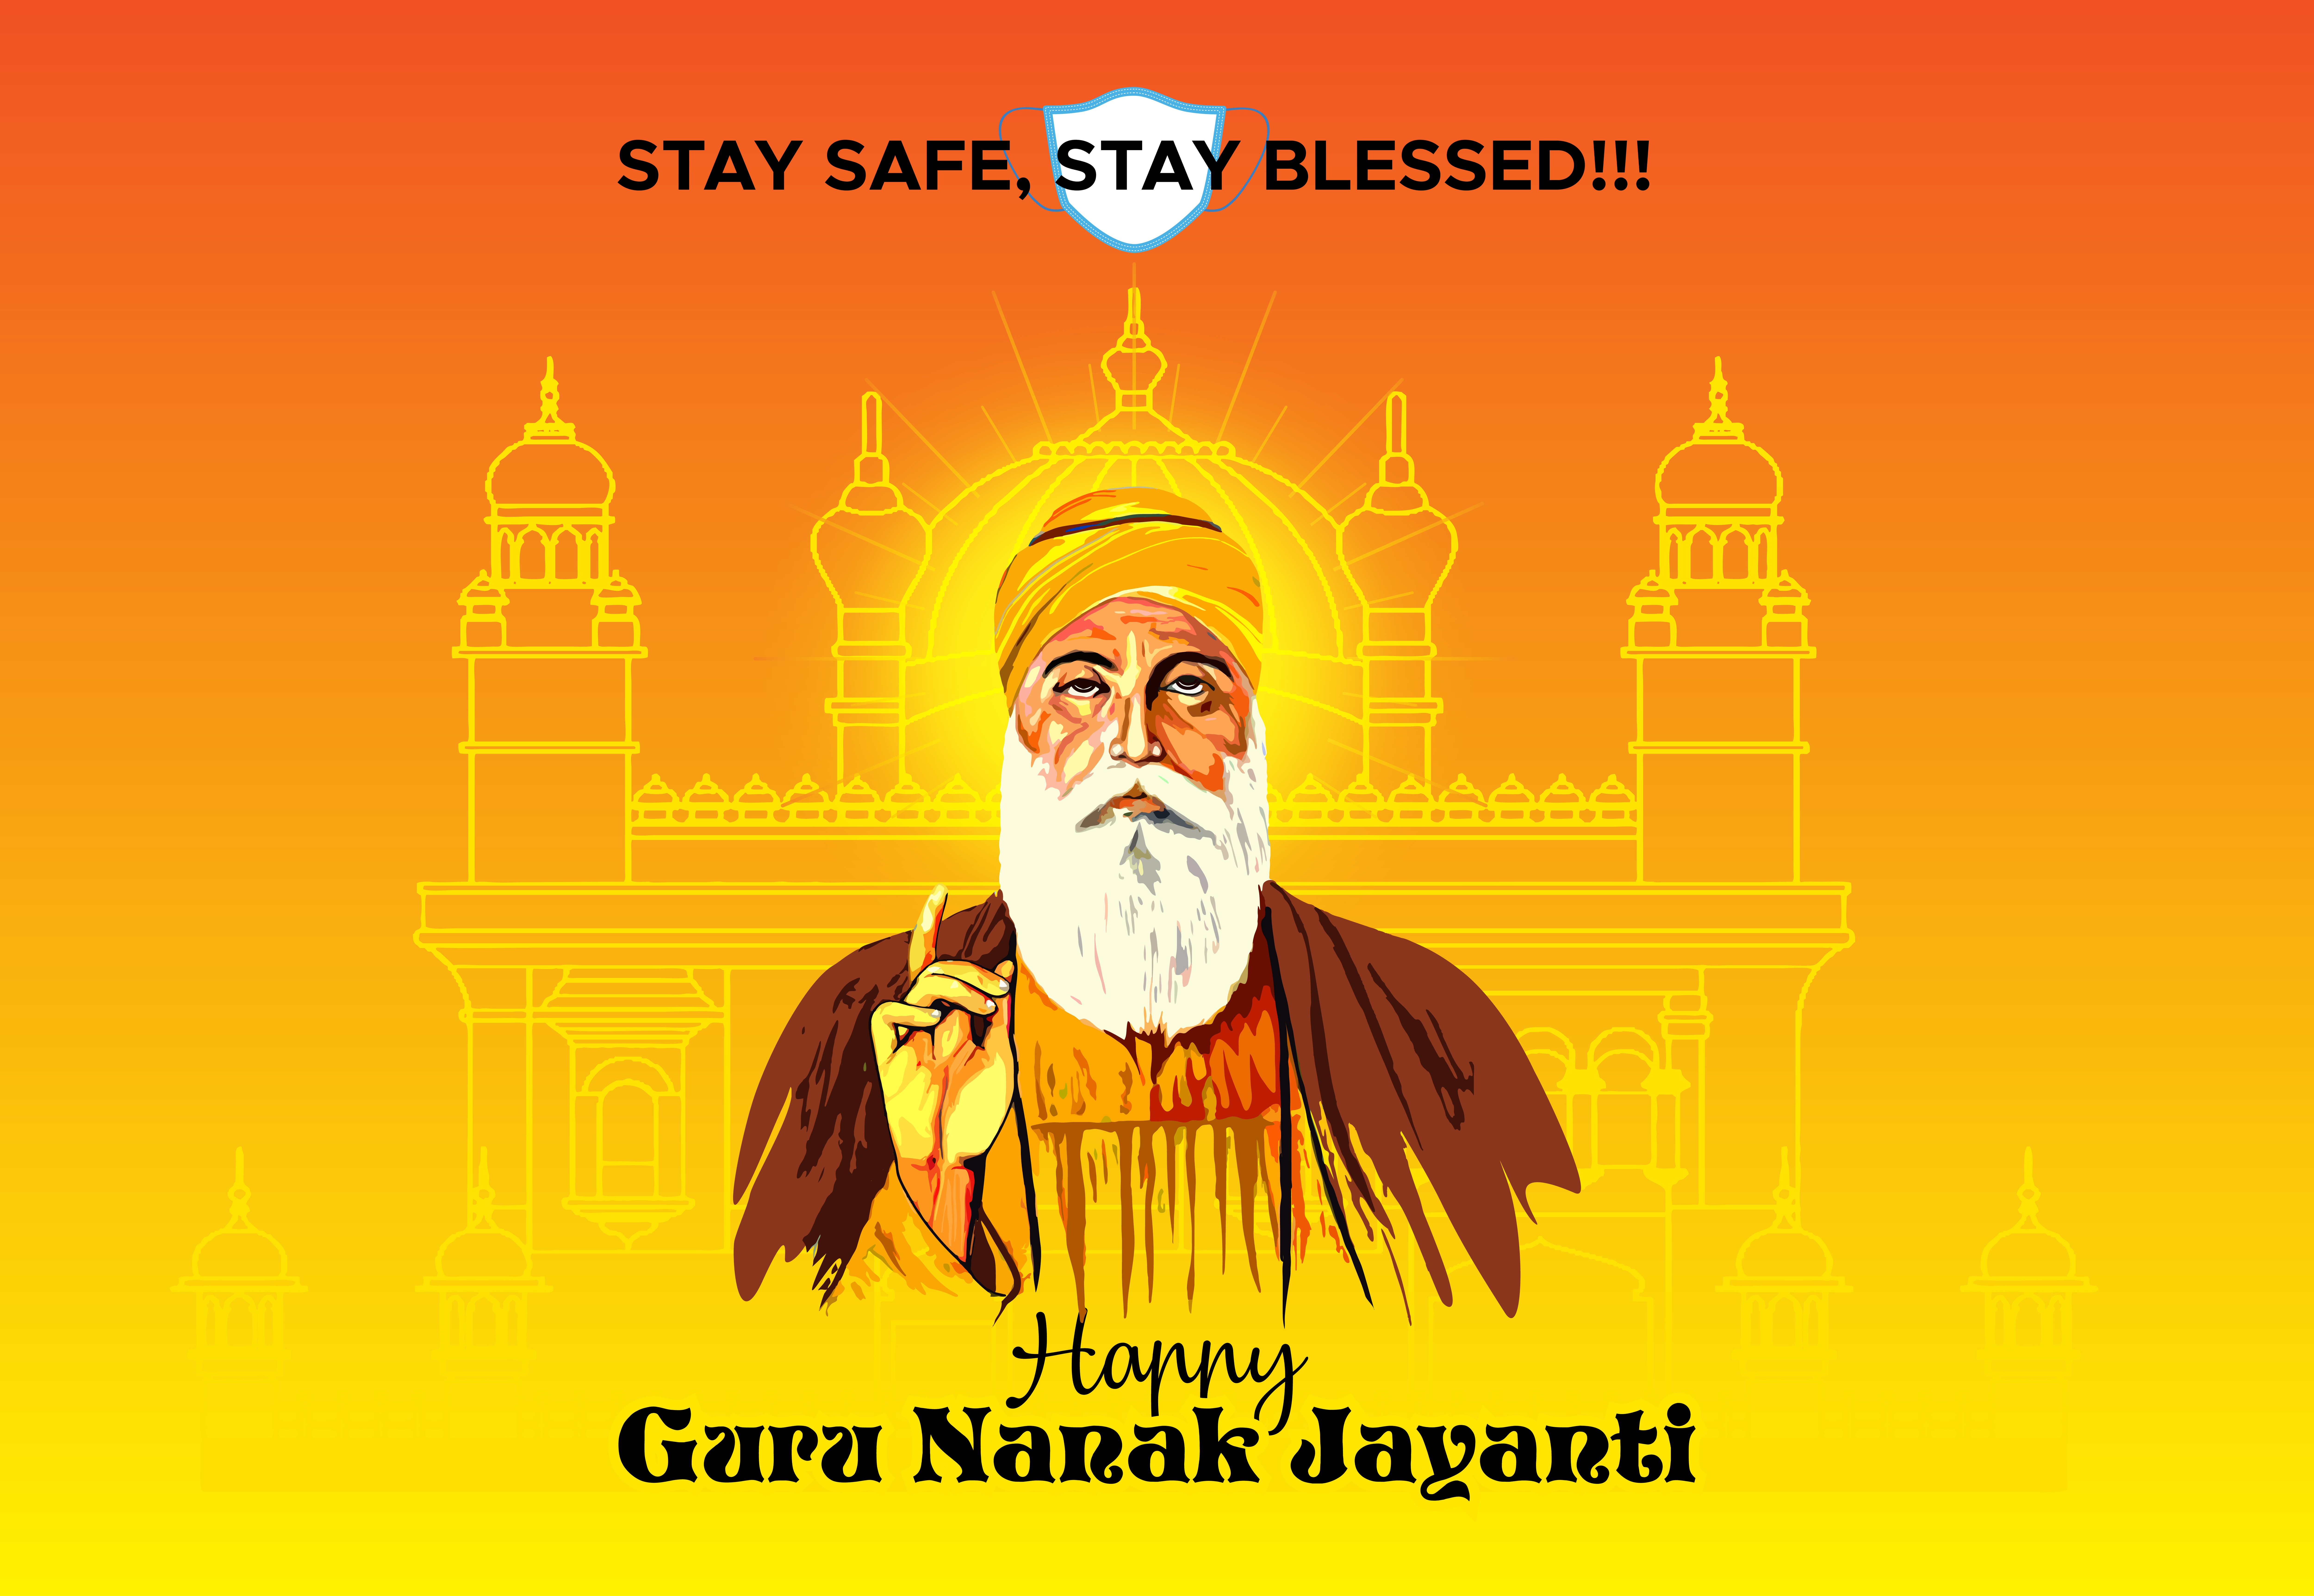 Happy Guru Nanak Jayanti 2021: Wishes, messages, quotes, greetings, SMS, WhatsApp and Facebook status to share with your family and friends. (Image: Shutterstock)